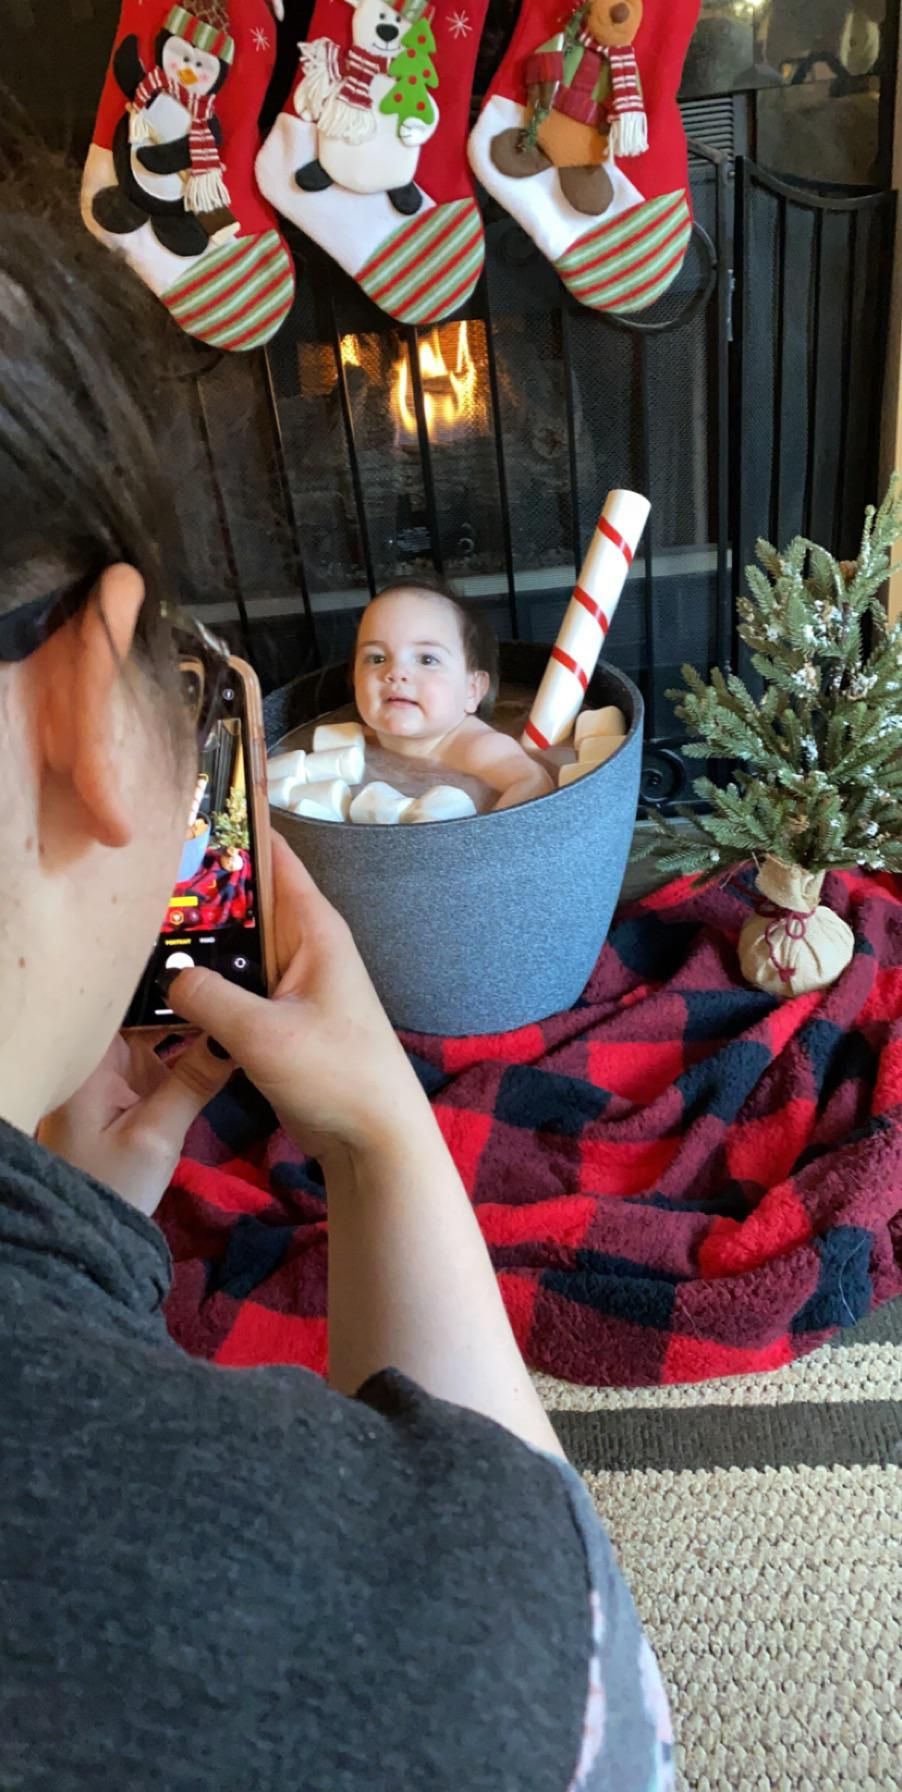 My wife has officially lost it during this years Christmas photos.